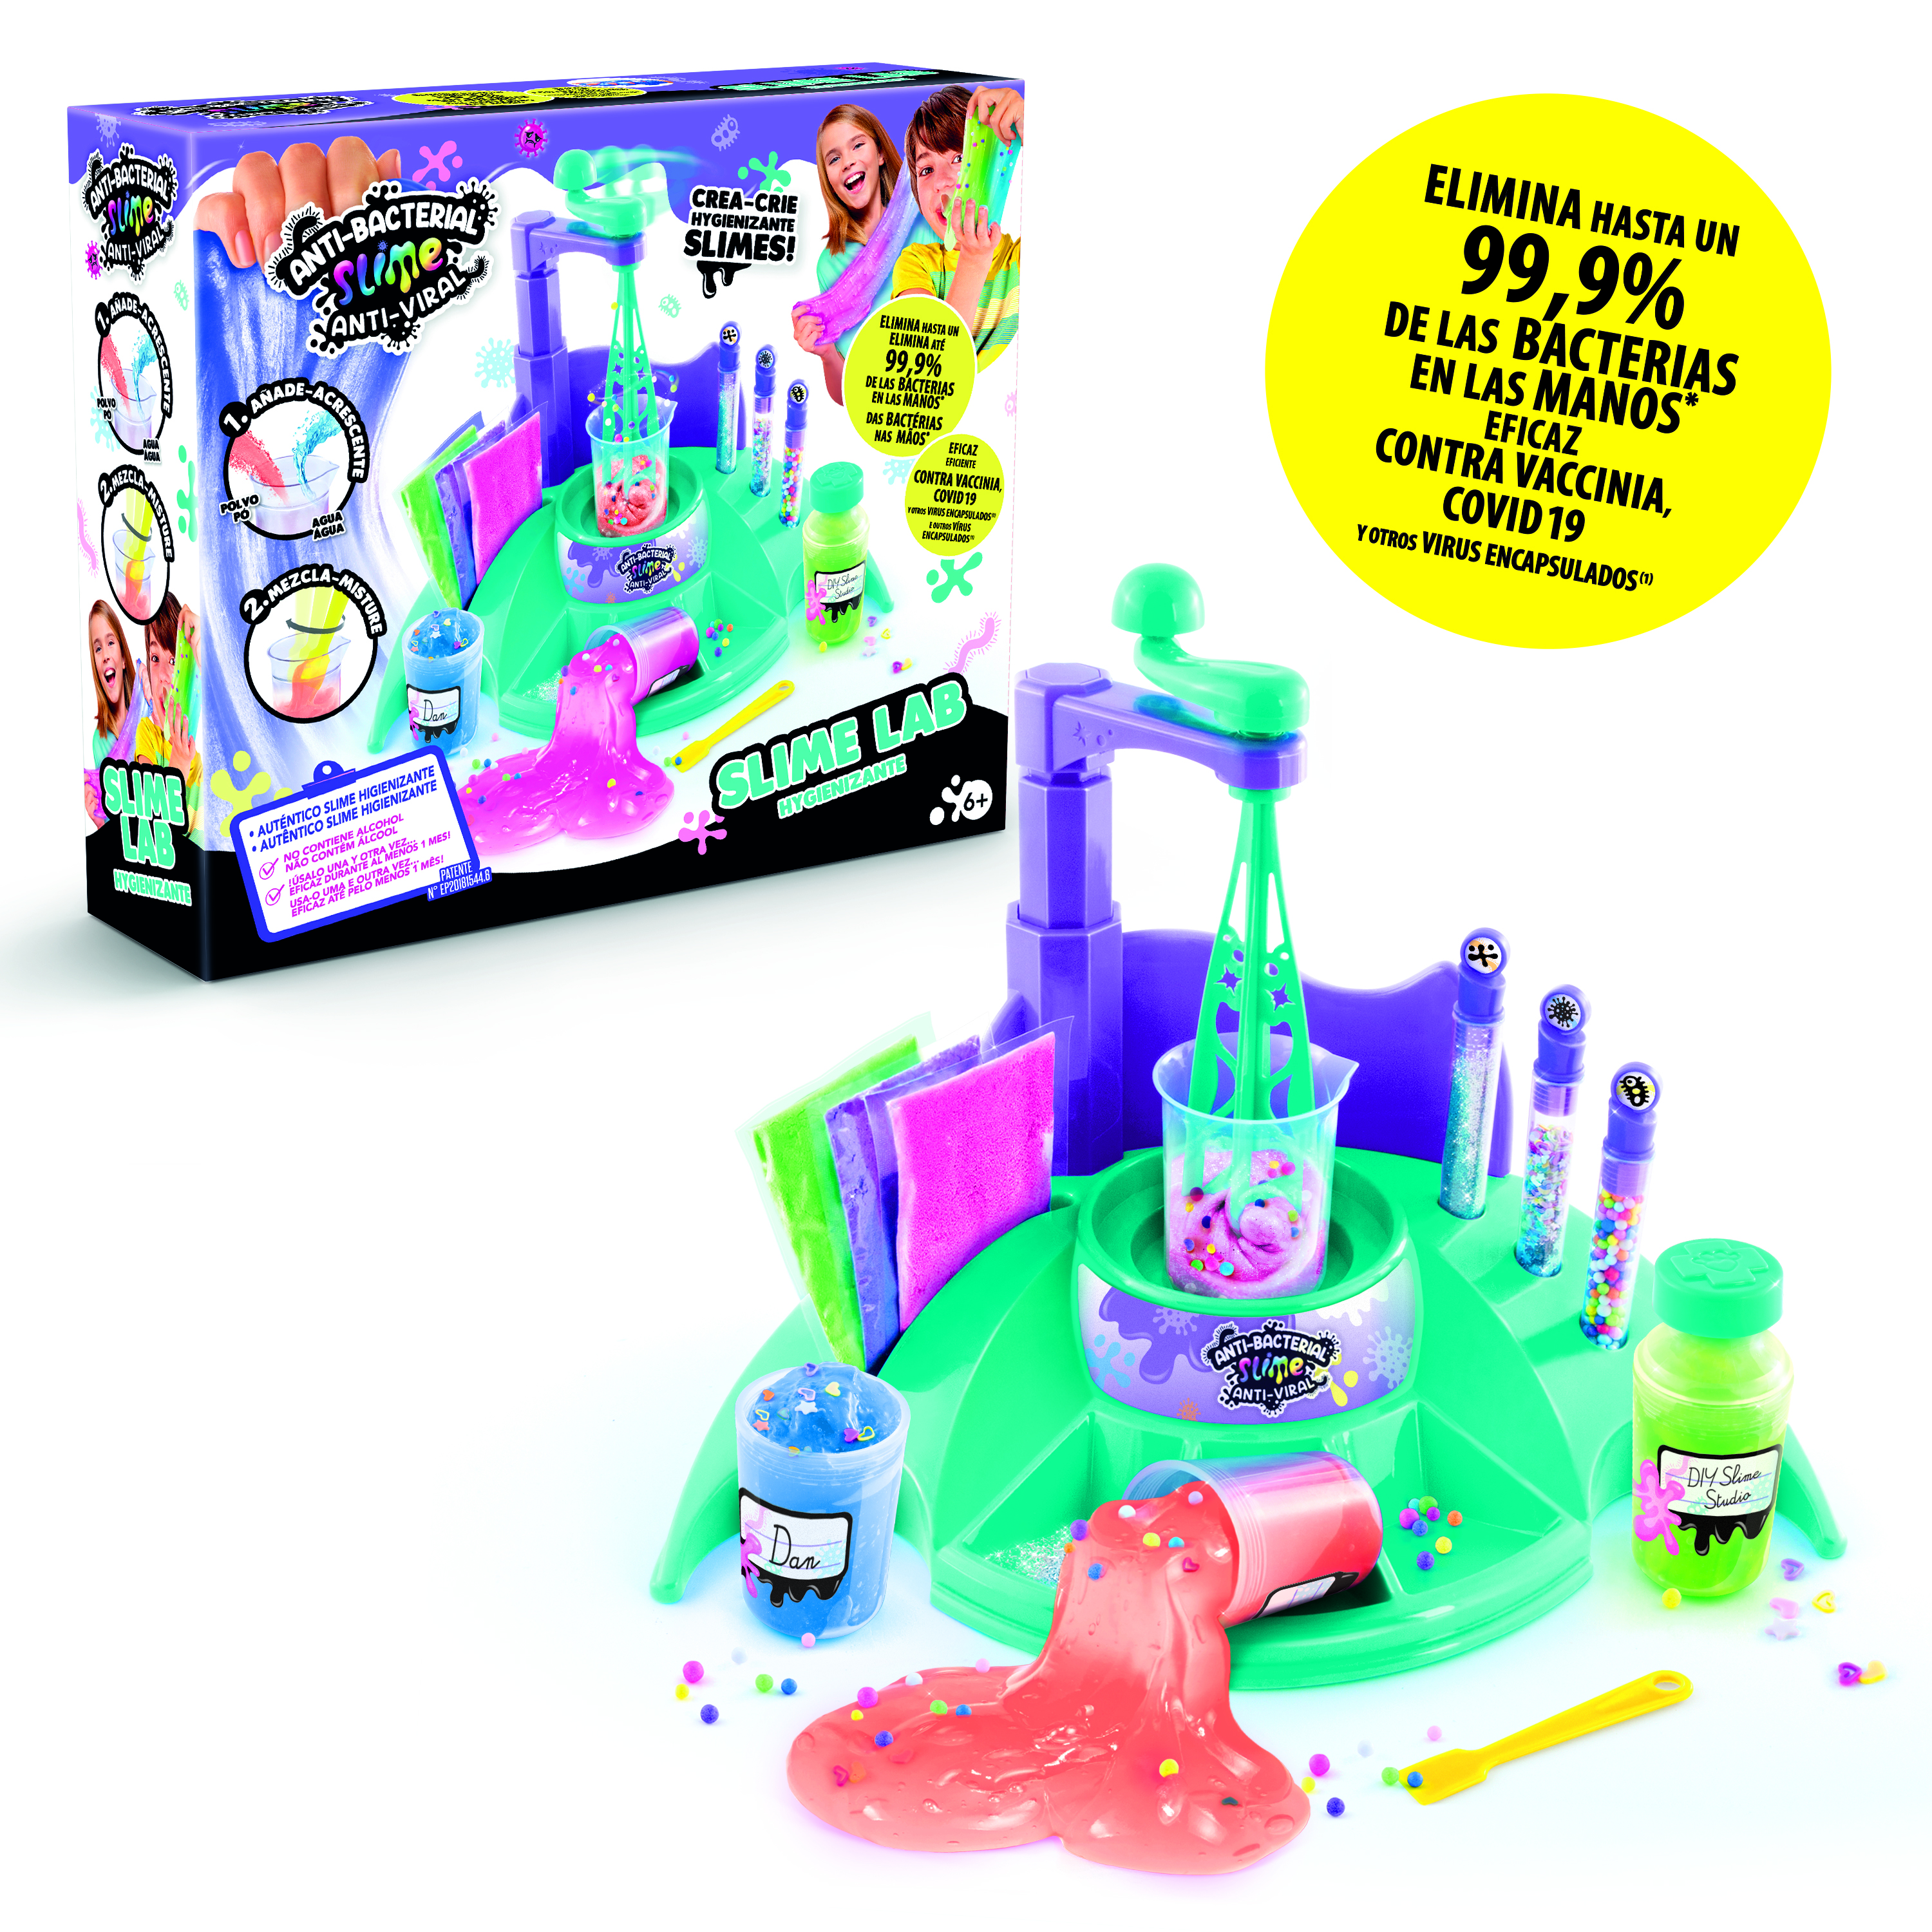 anti-bacterial slime laboratorio( canal toys- dsm012)